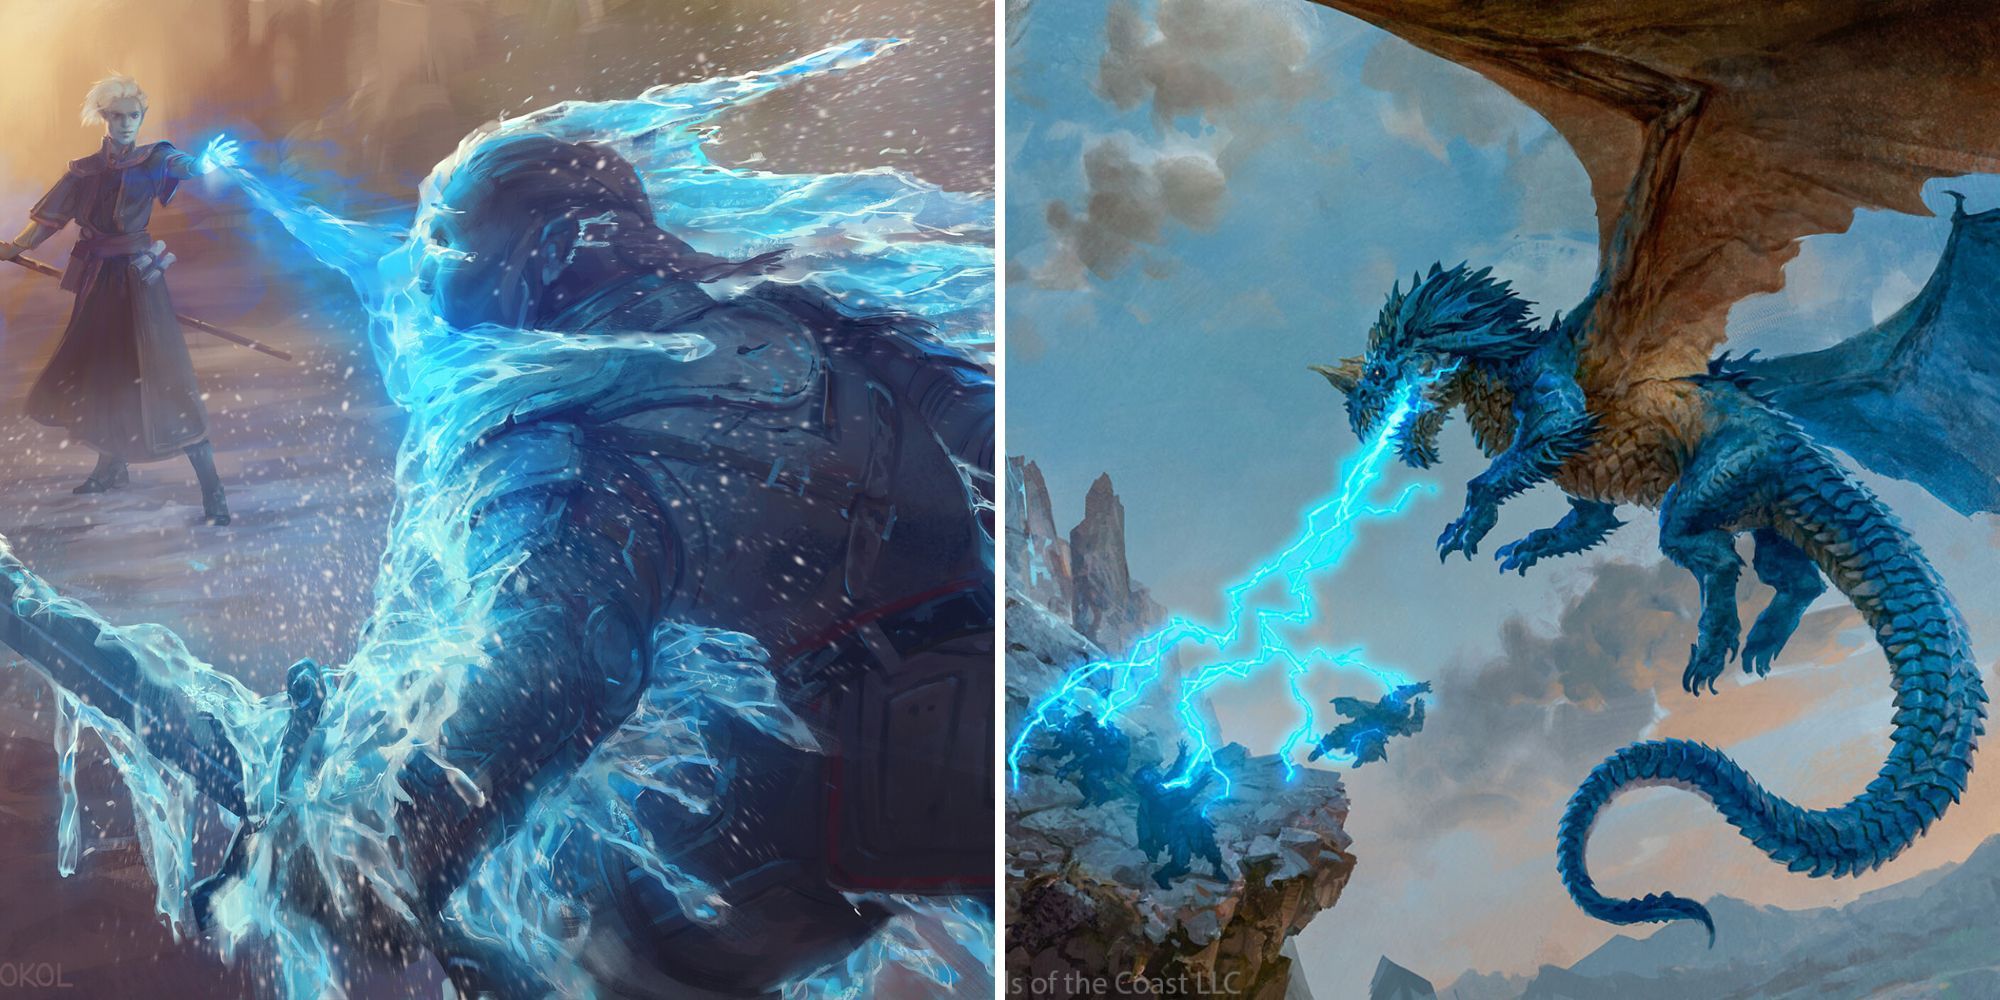 Frozen fighter against blue dragon killing party with lightning